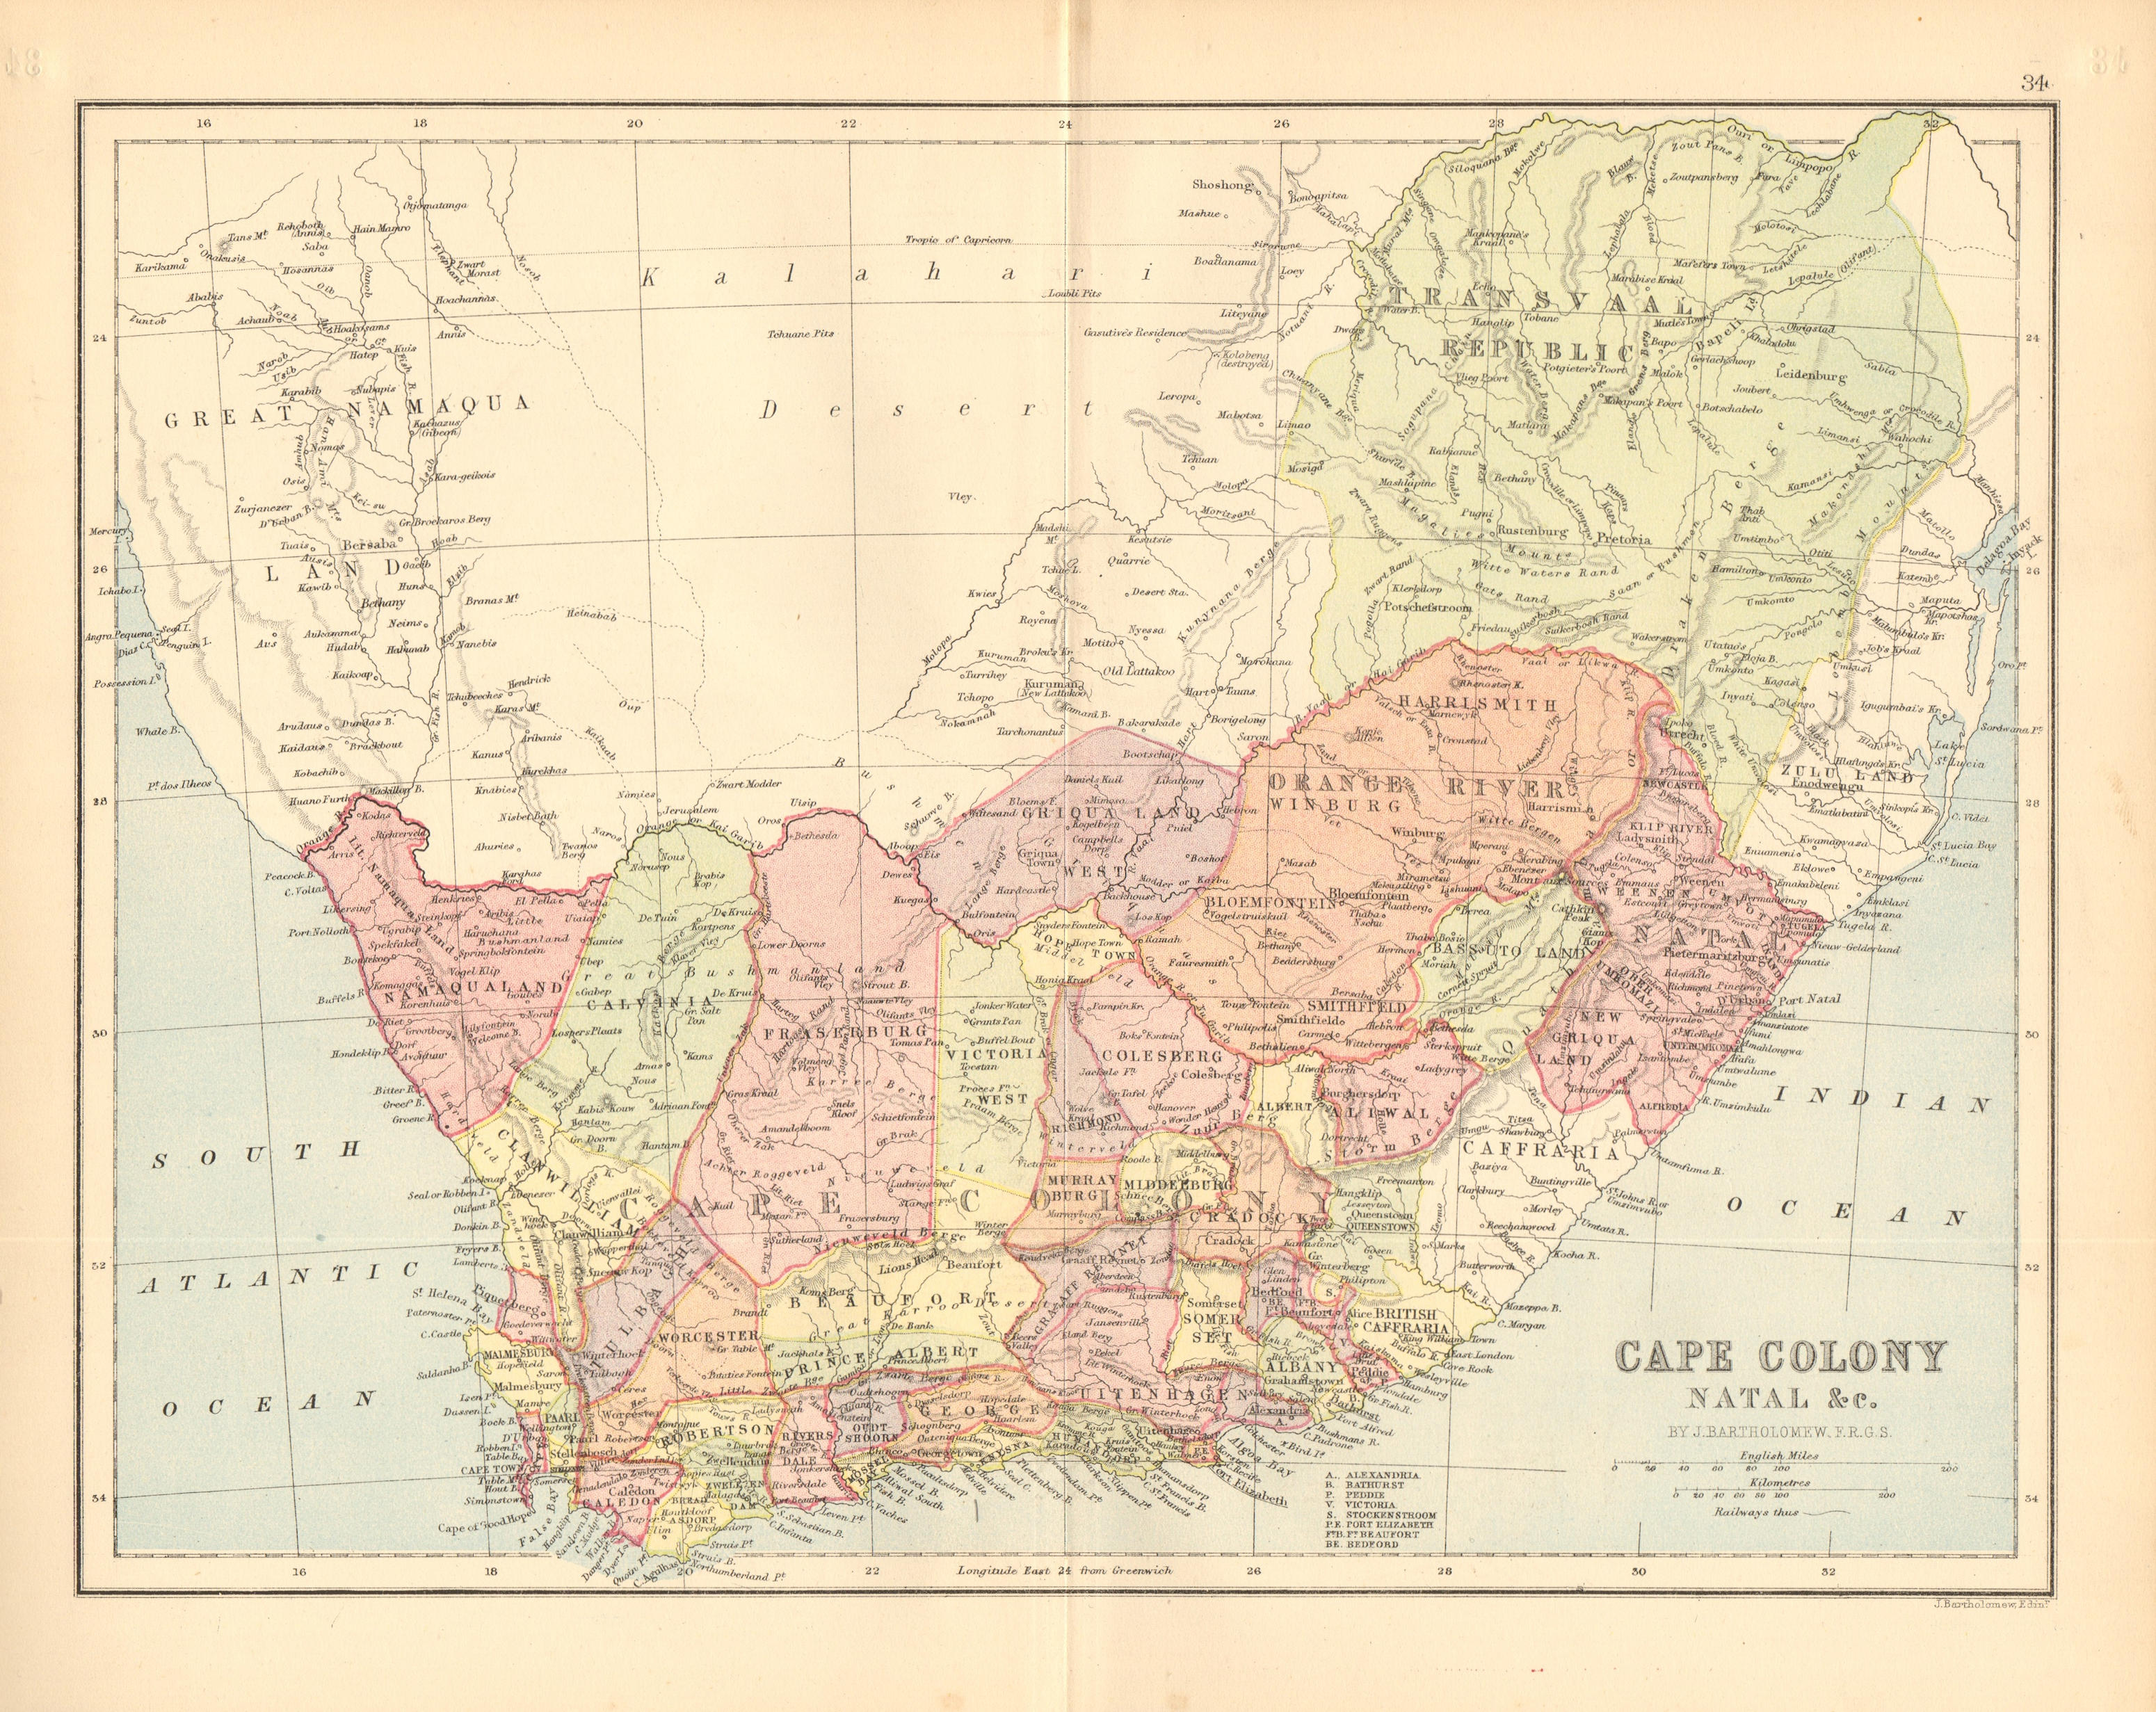 Associate Product SOUTH AFRICA. 'Cape Colony Natal &c.'. Excludes Caffraria & Zulu land 1876 map